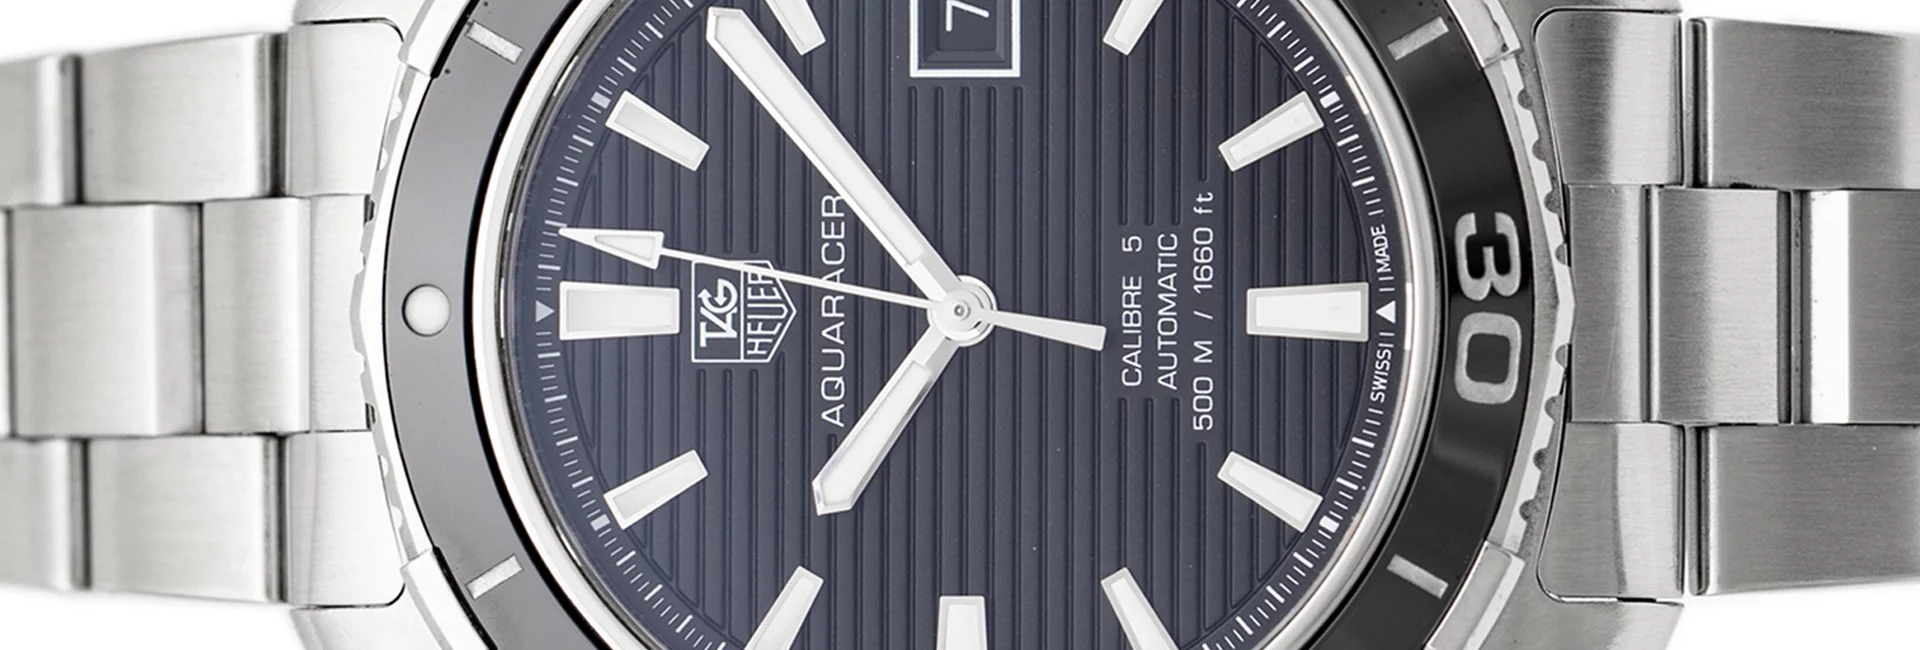 Pre-owned Tag Heuer